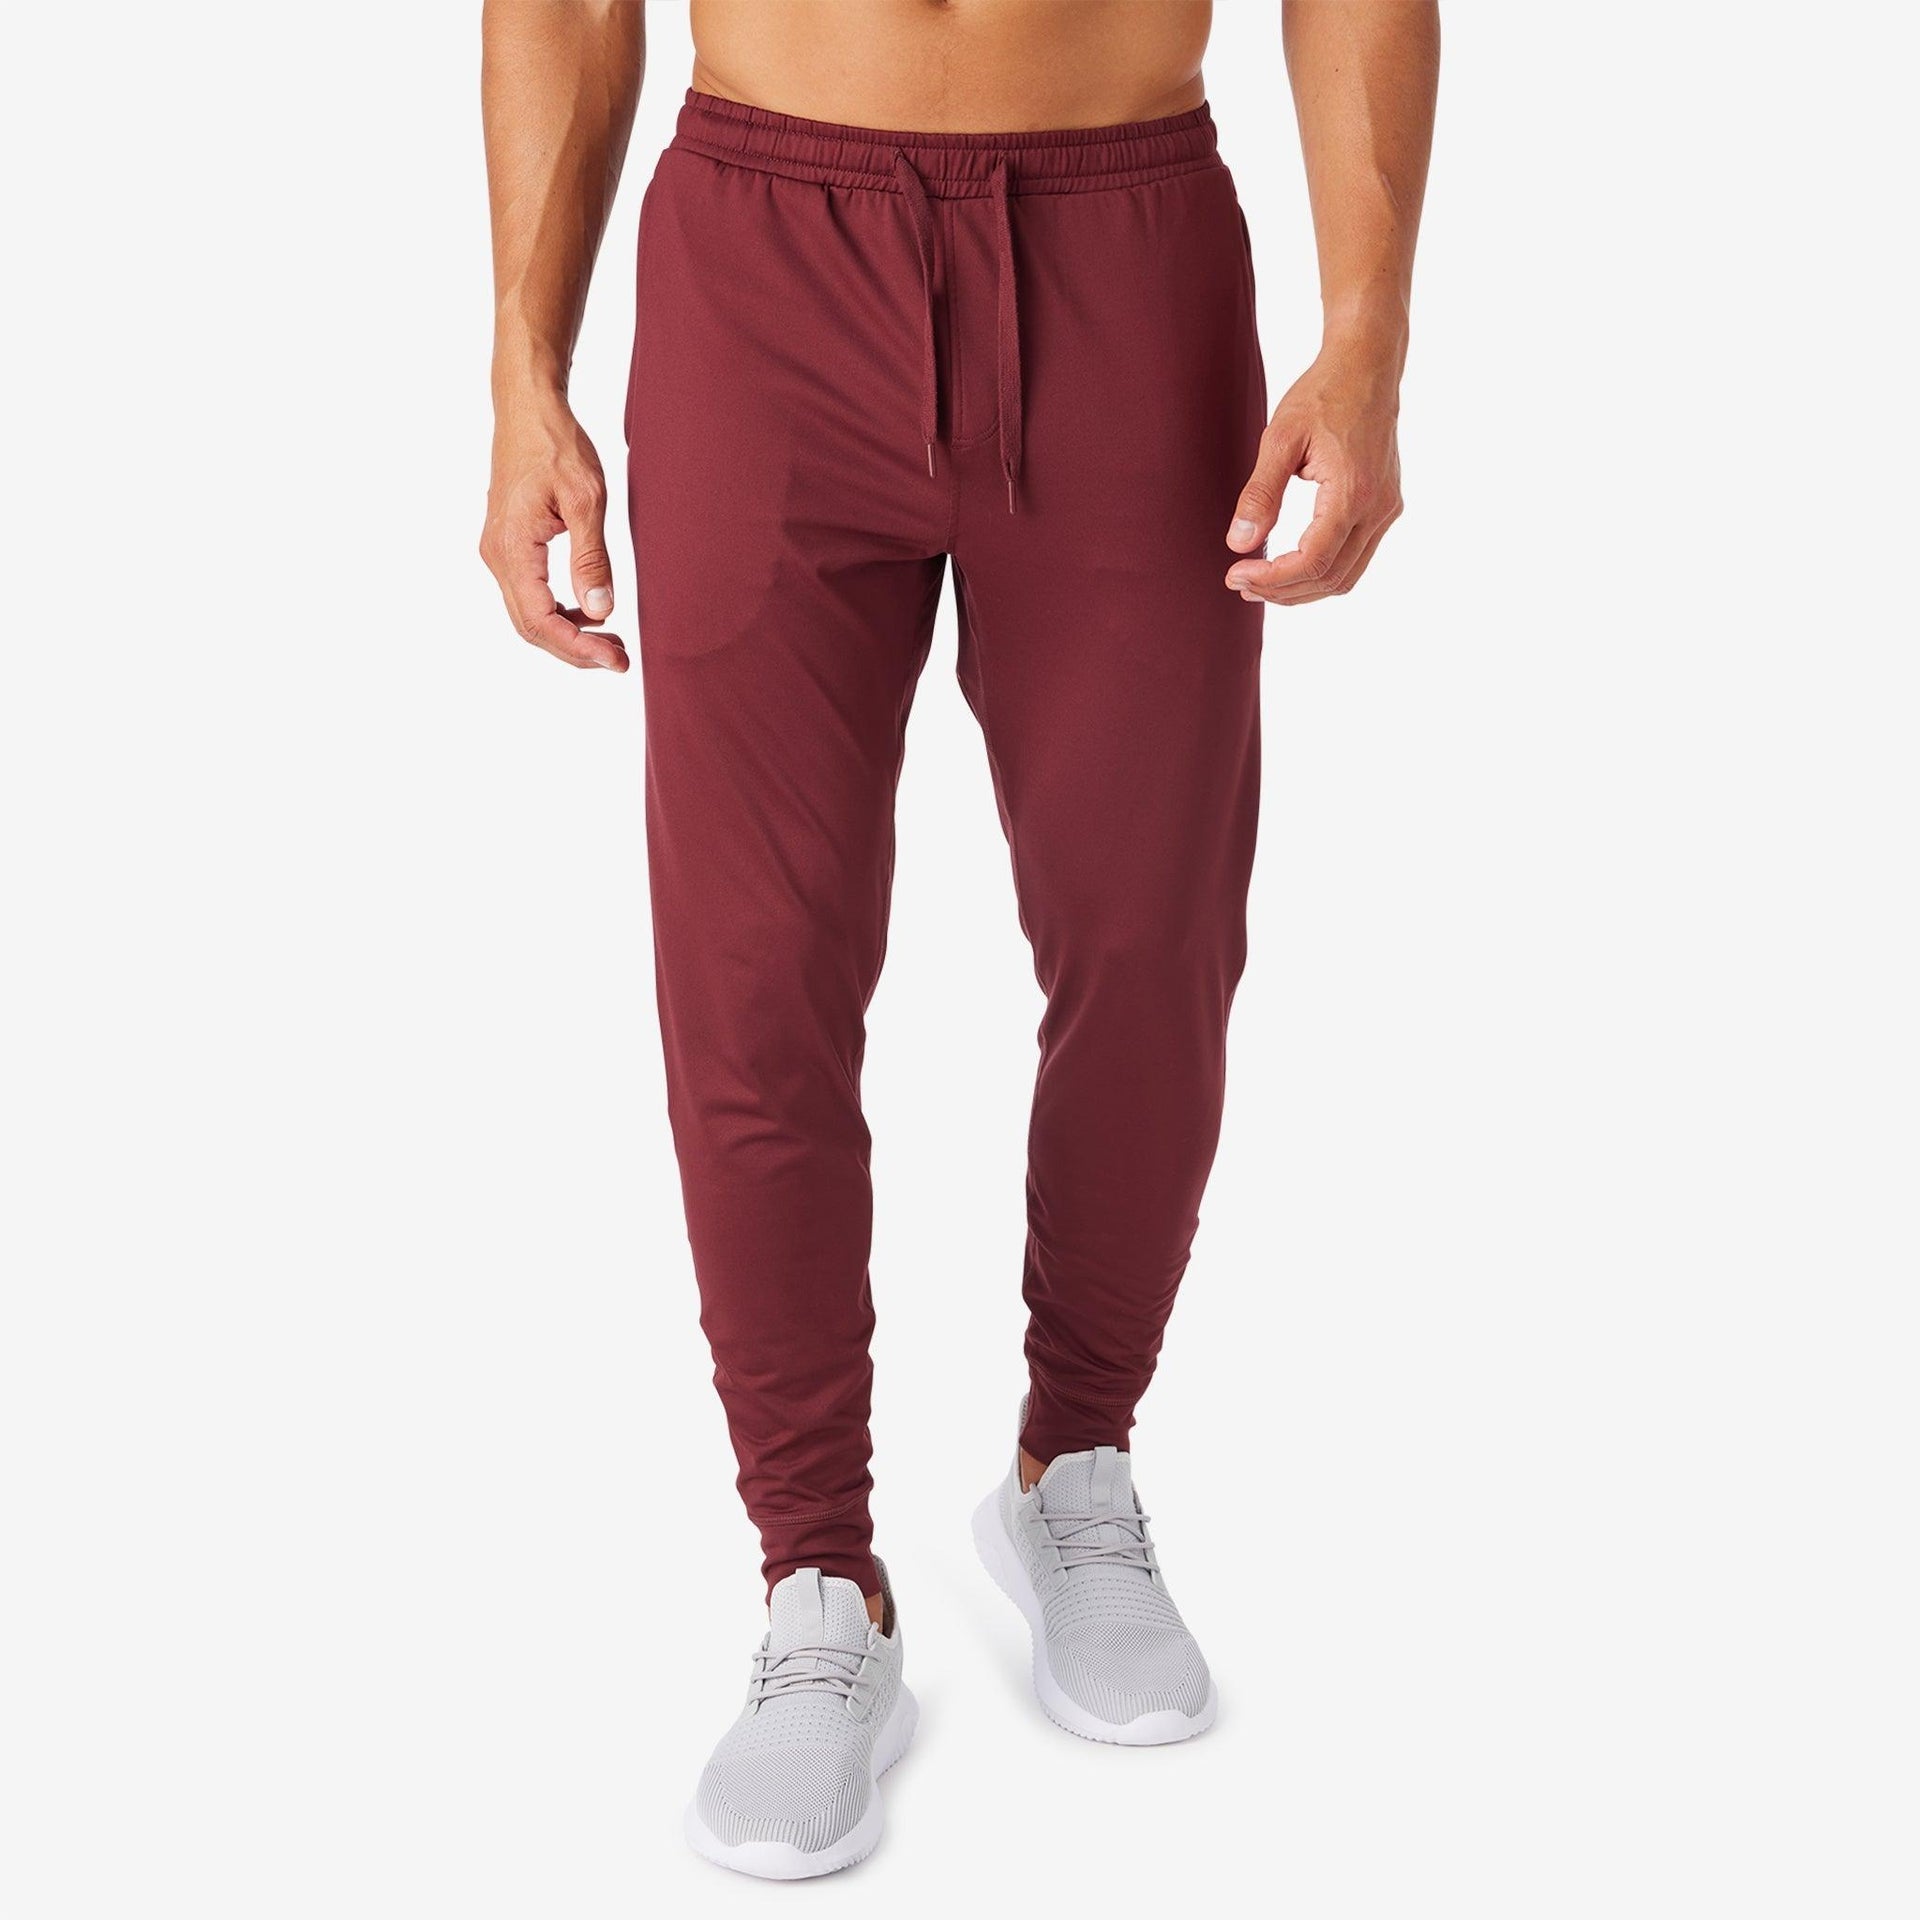 NEW Men's Soft Gym Pants - All in Motion Maroon XL, XXL, L, MAROON Red